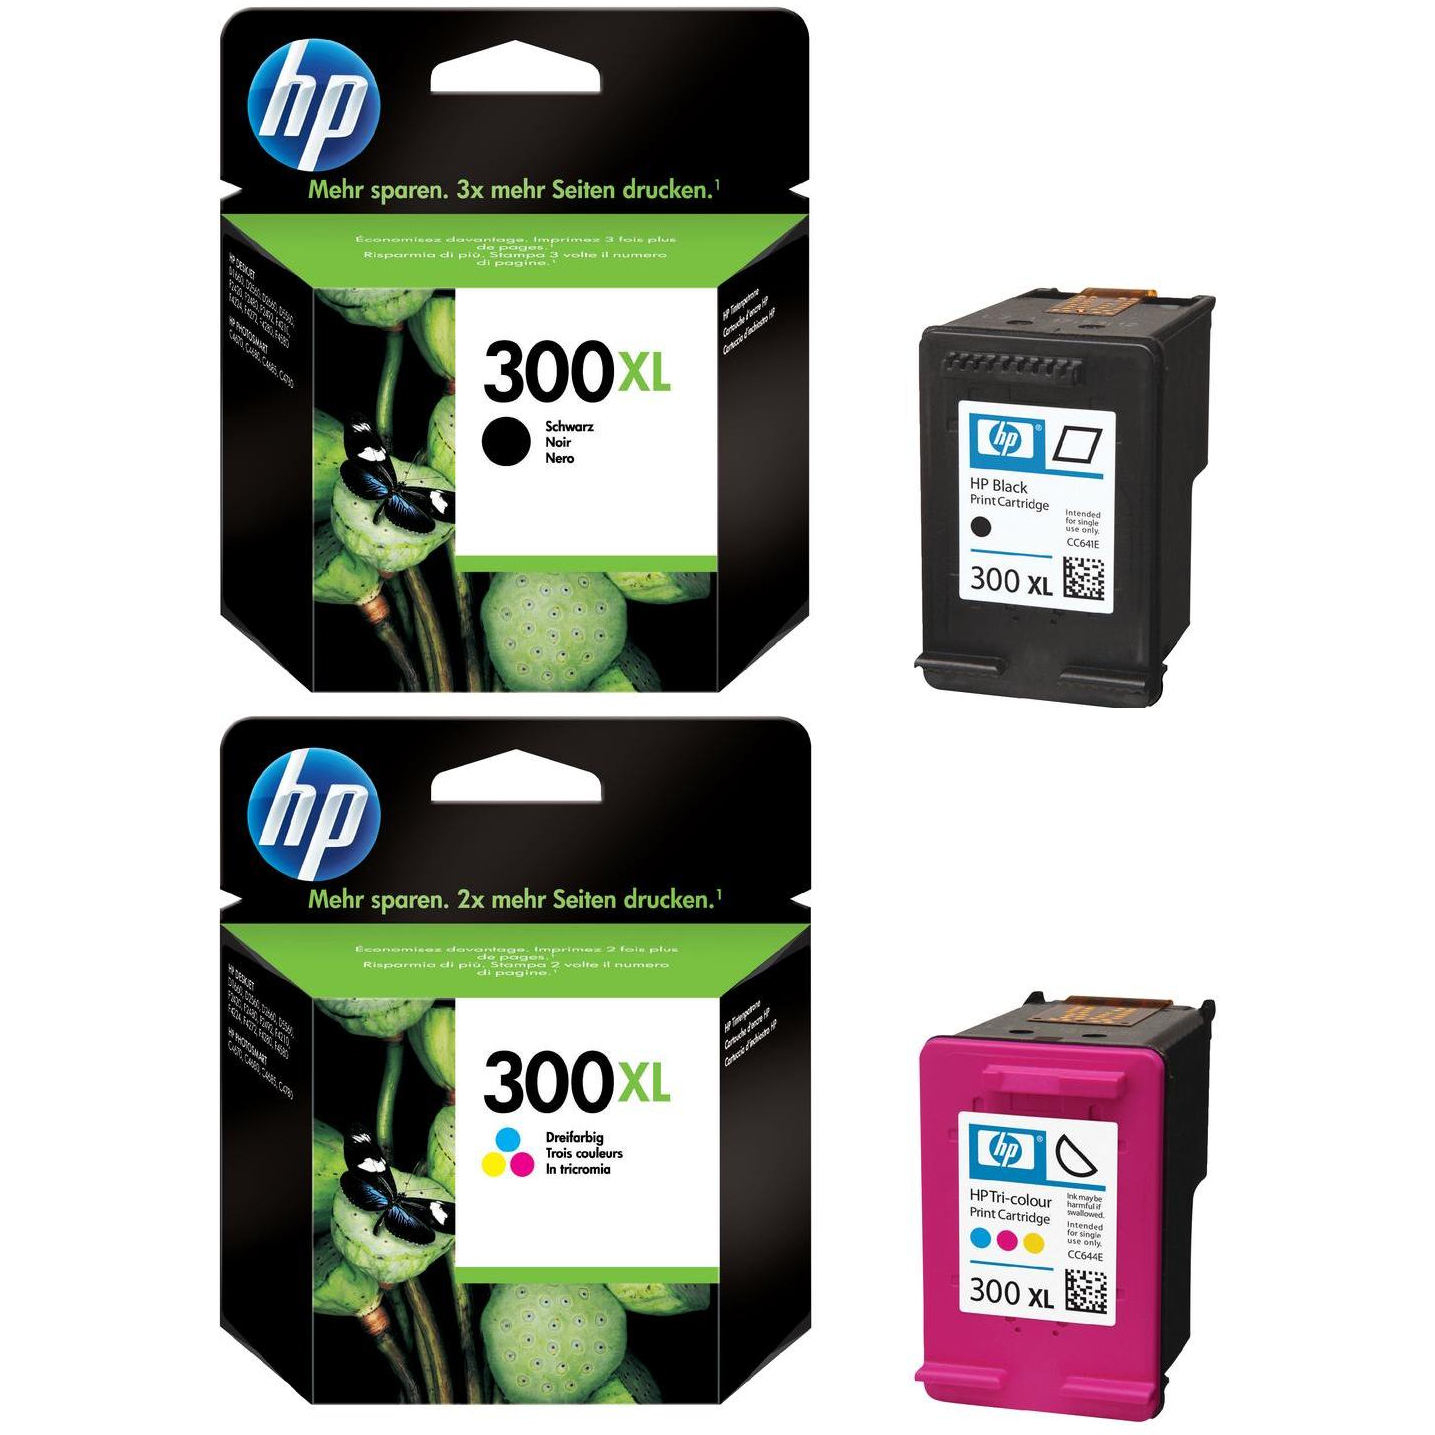 Related to HP OFFICEJET 300: HP-300XL-Pack